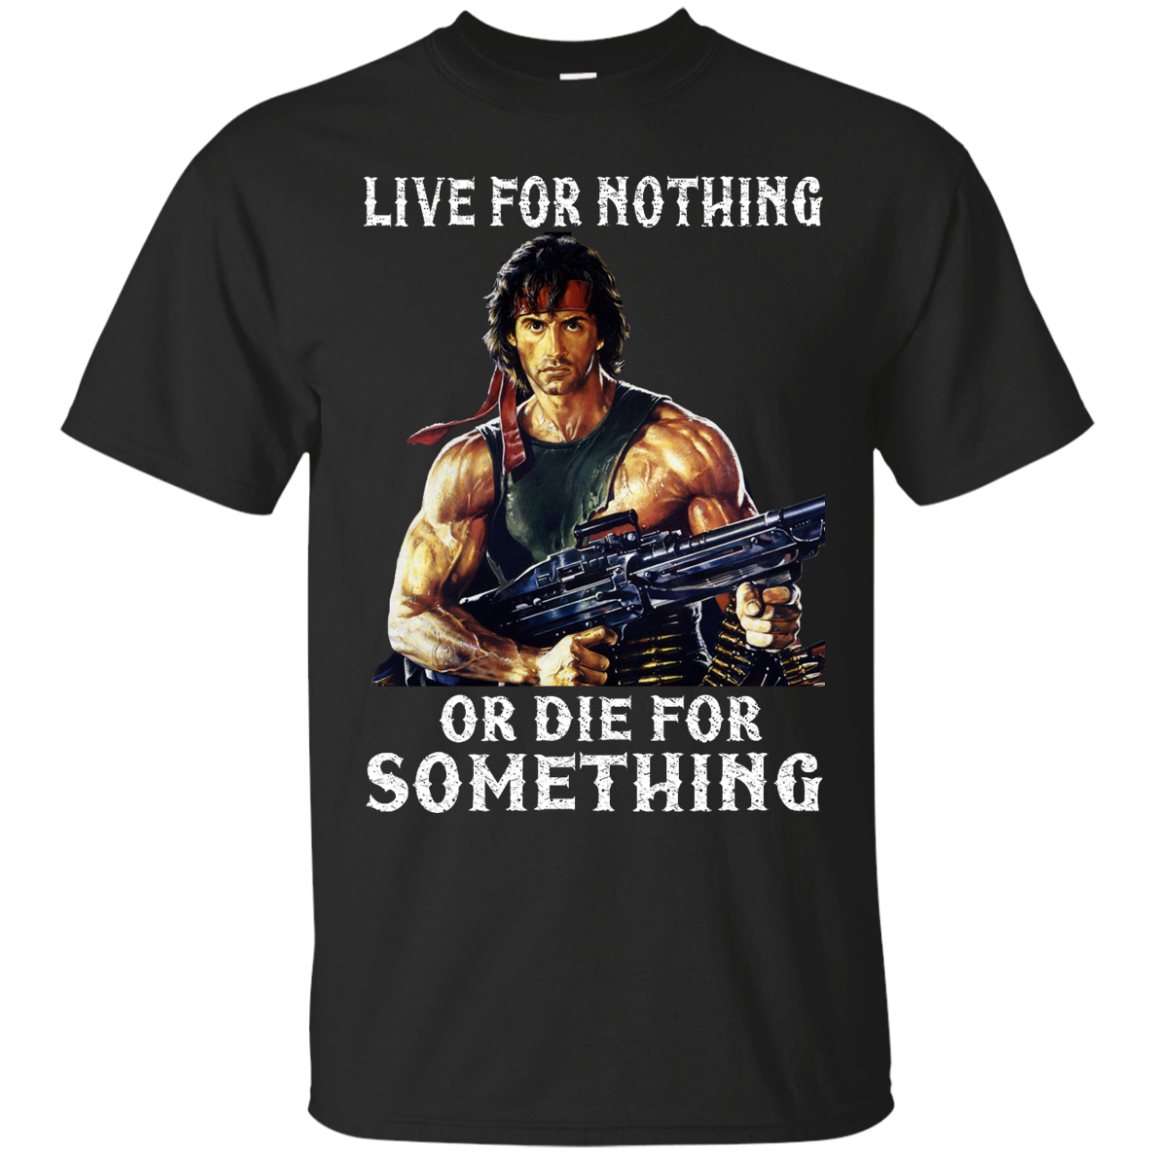 Rambo: Live For Nothing or Die for Something Shirt, Hoodie. Tank